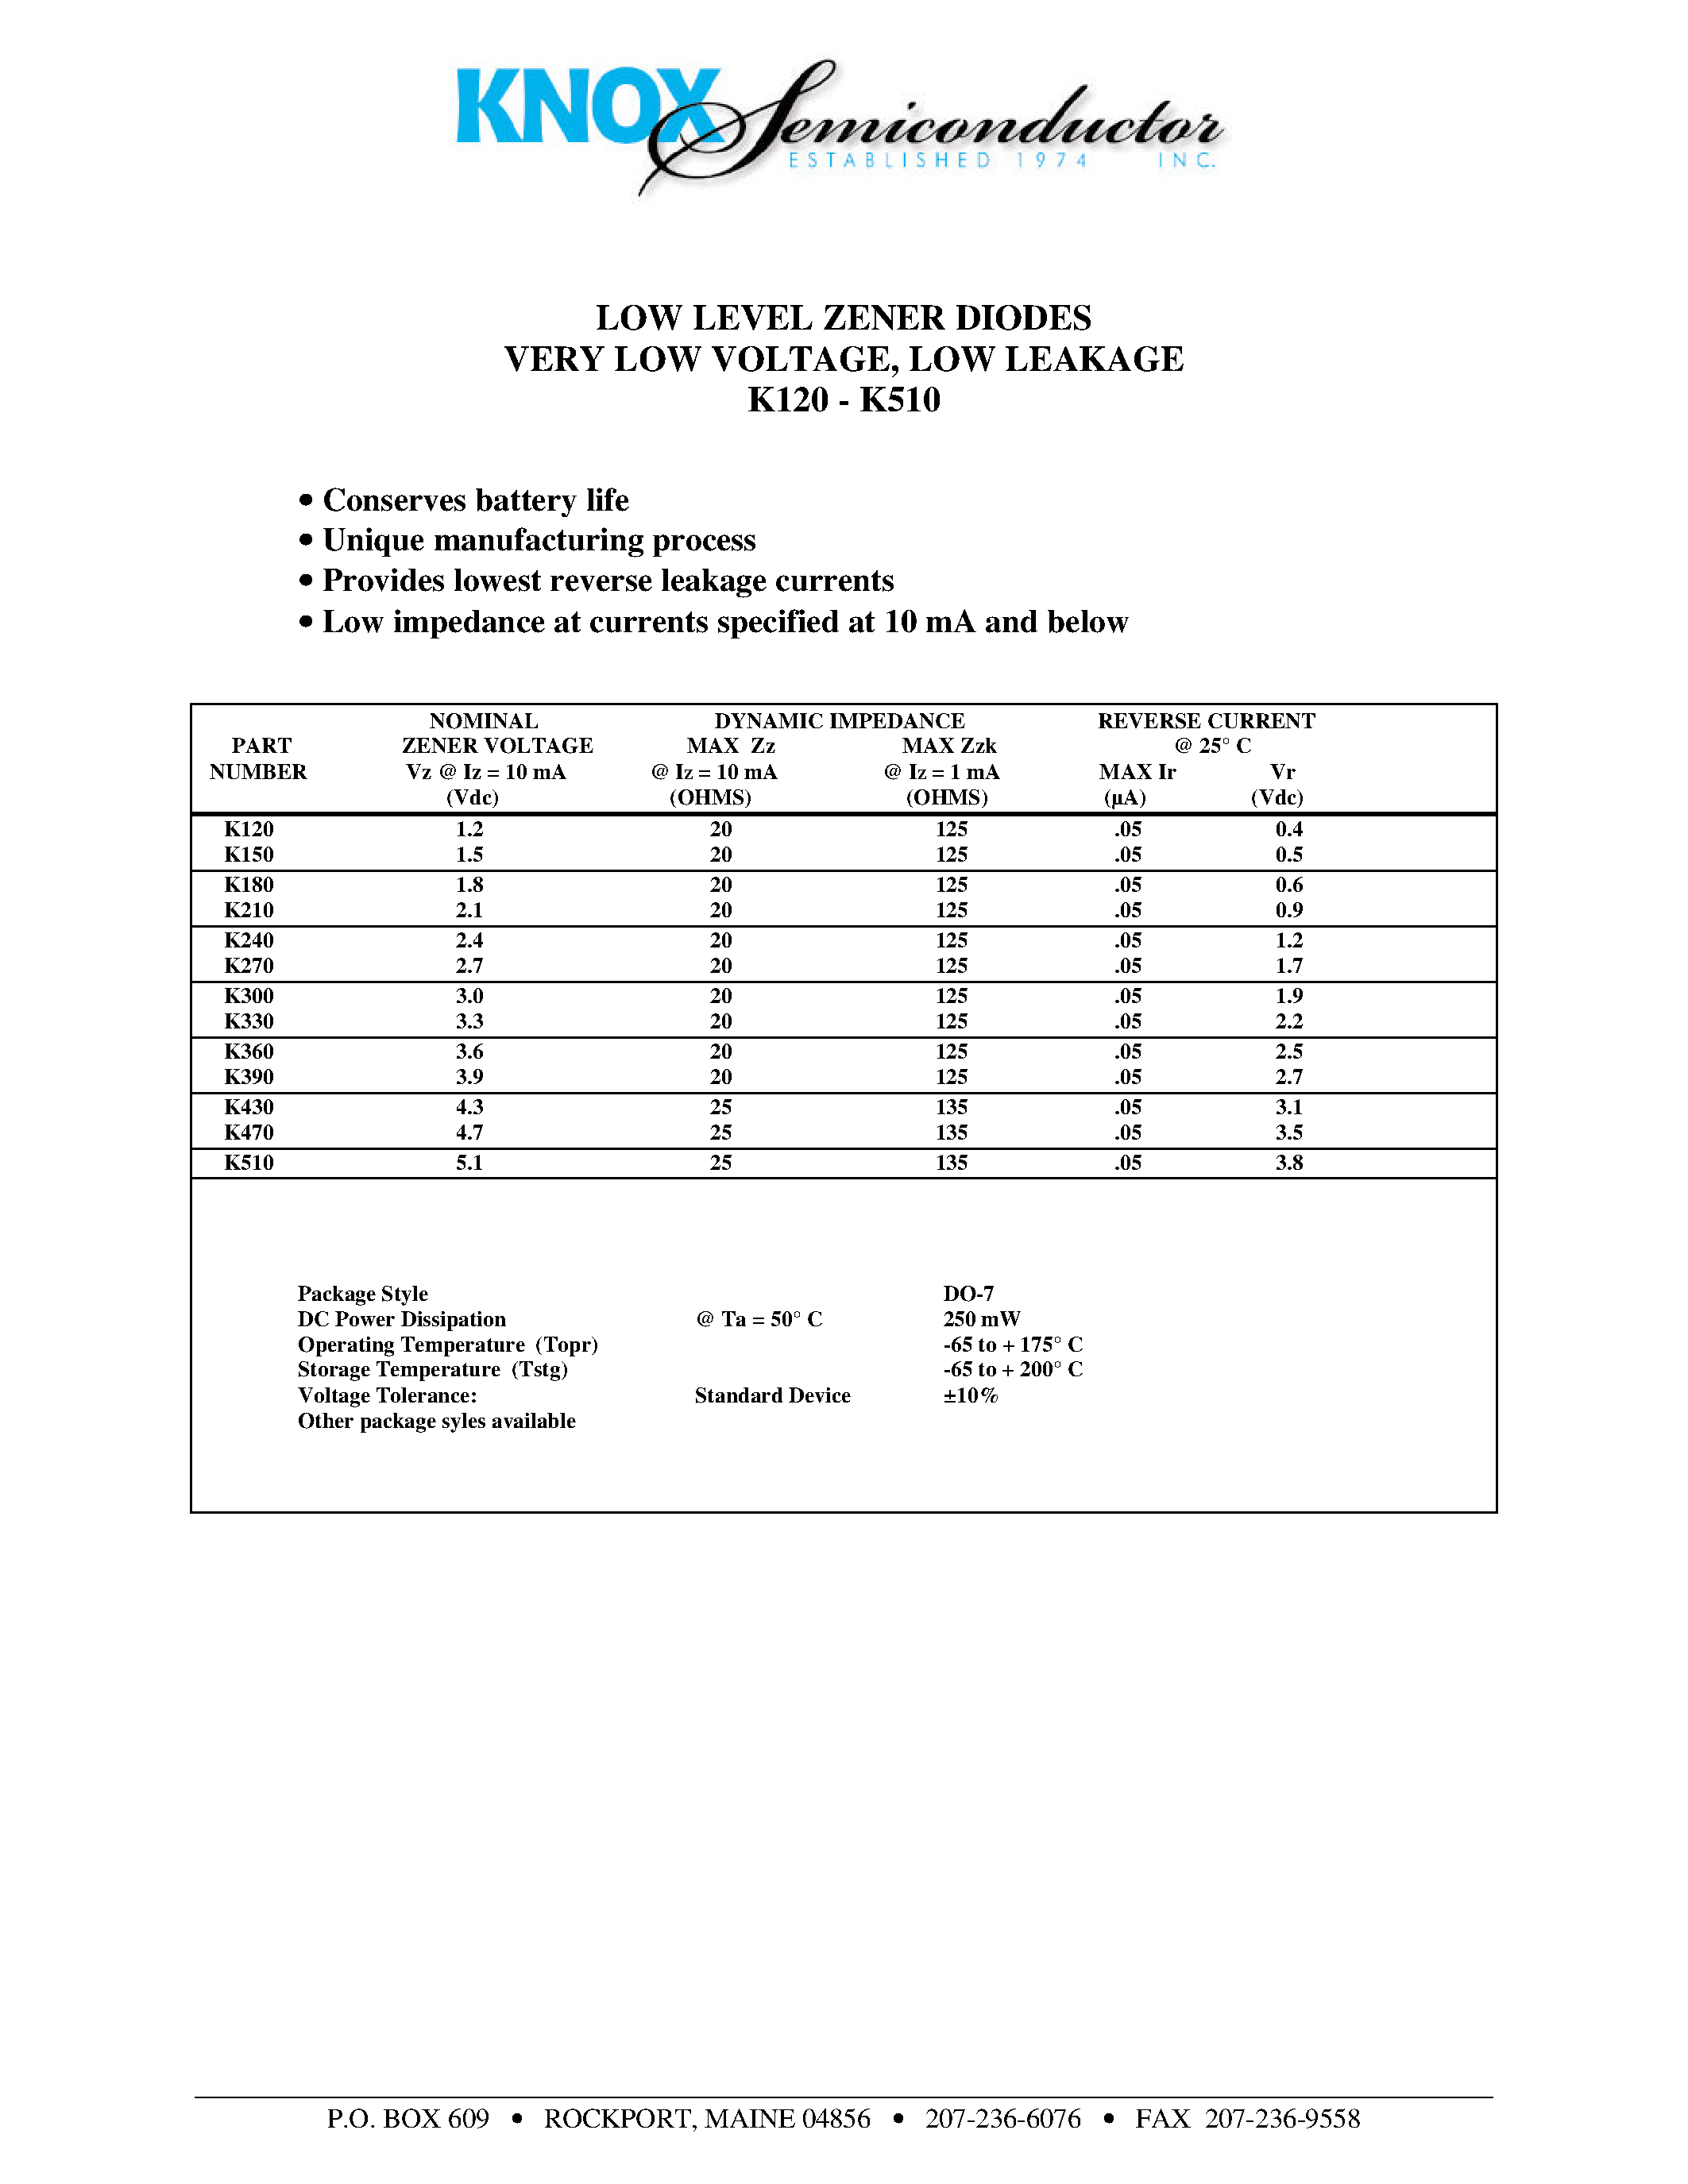 Datasheet K430 - LOW LEVEL ZENER DIODES VERY LOW VOLTAGE/ LOW LEAKAGE page 1